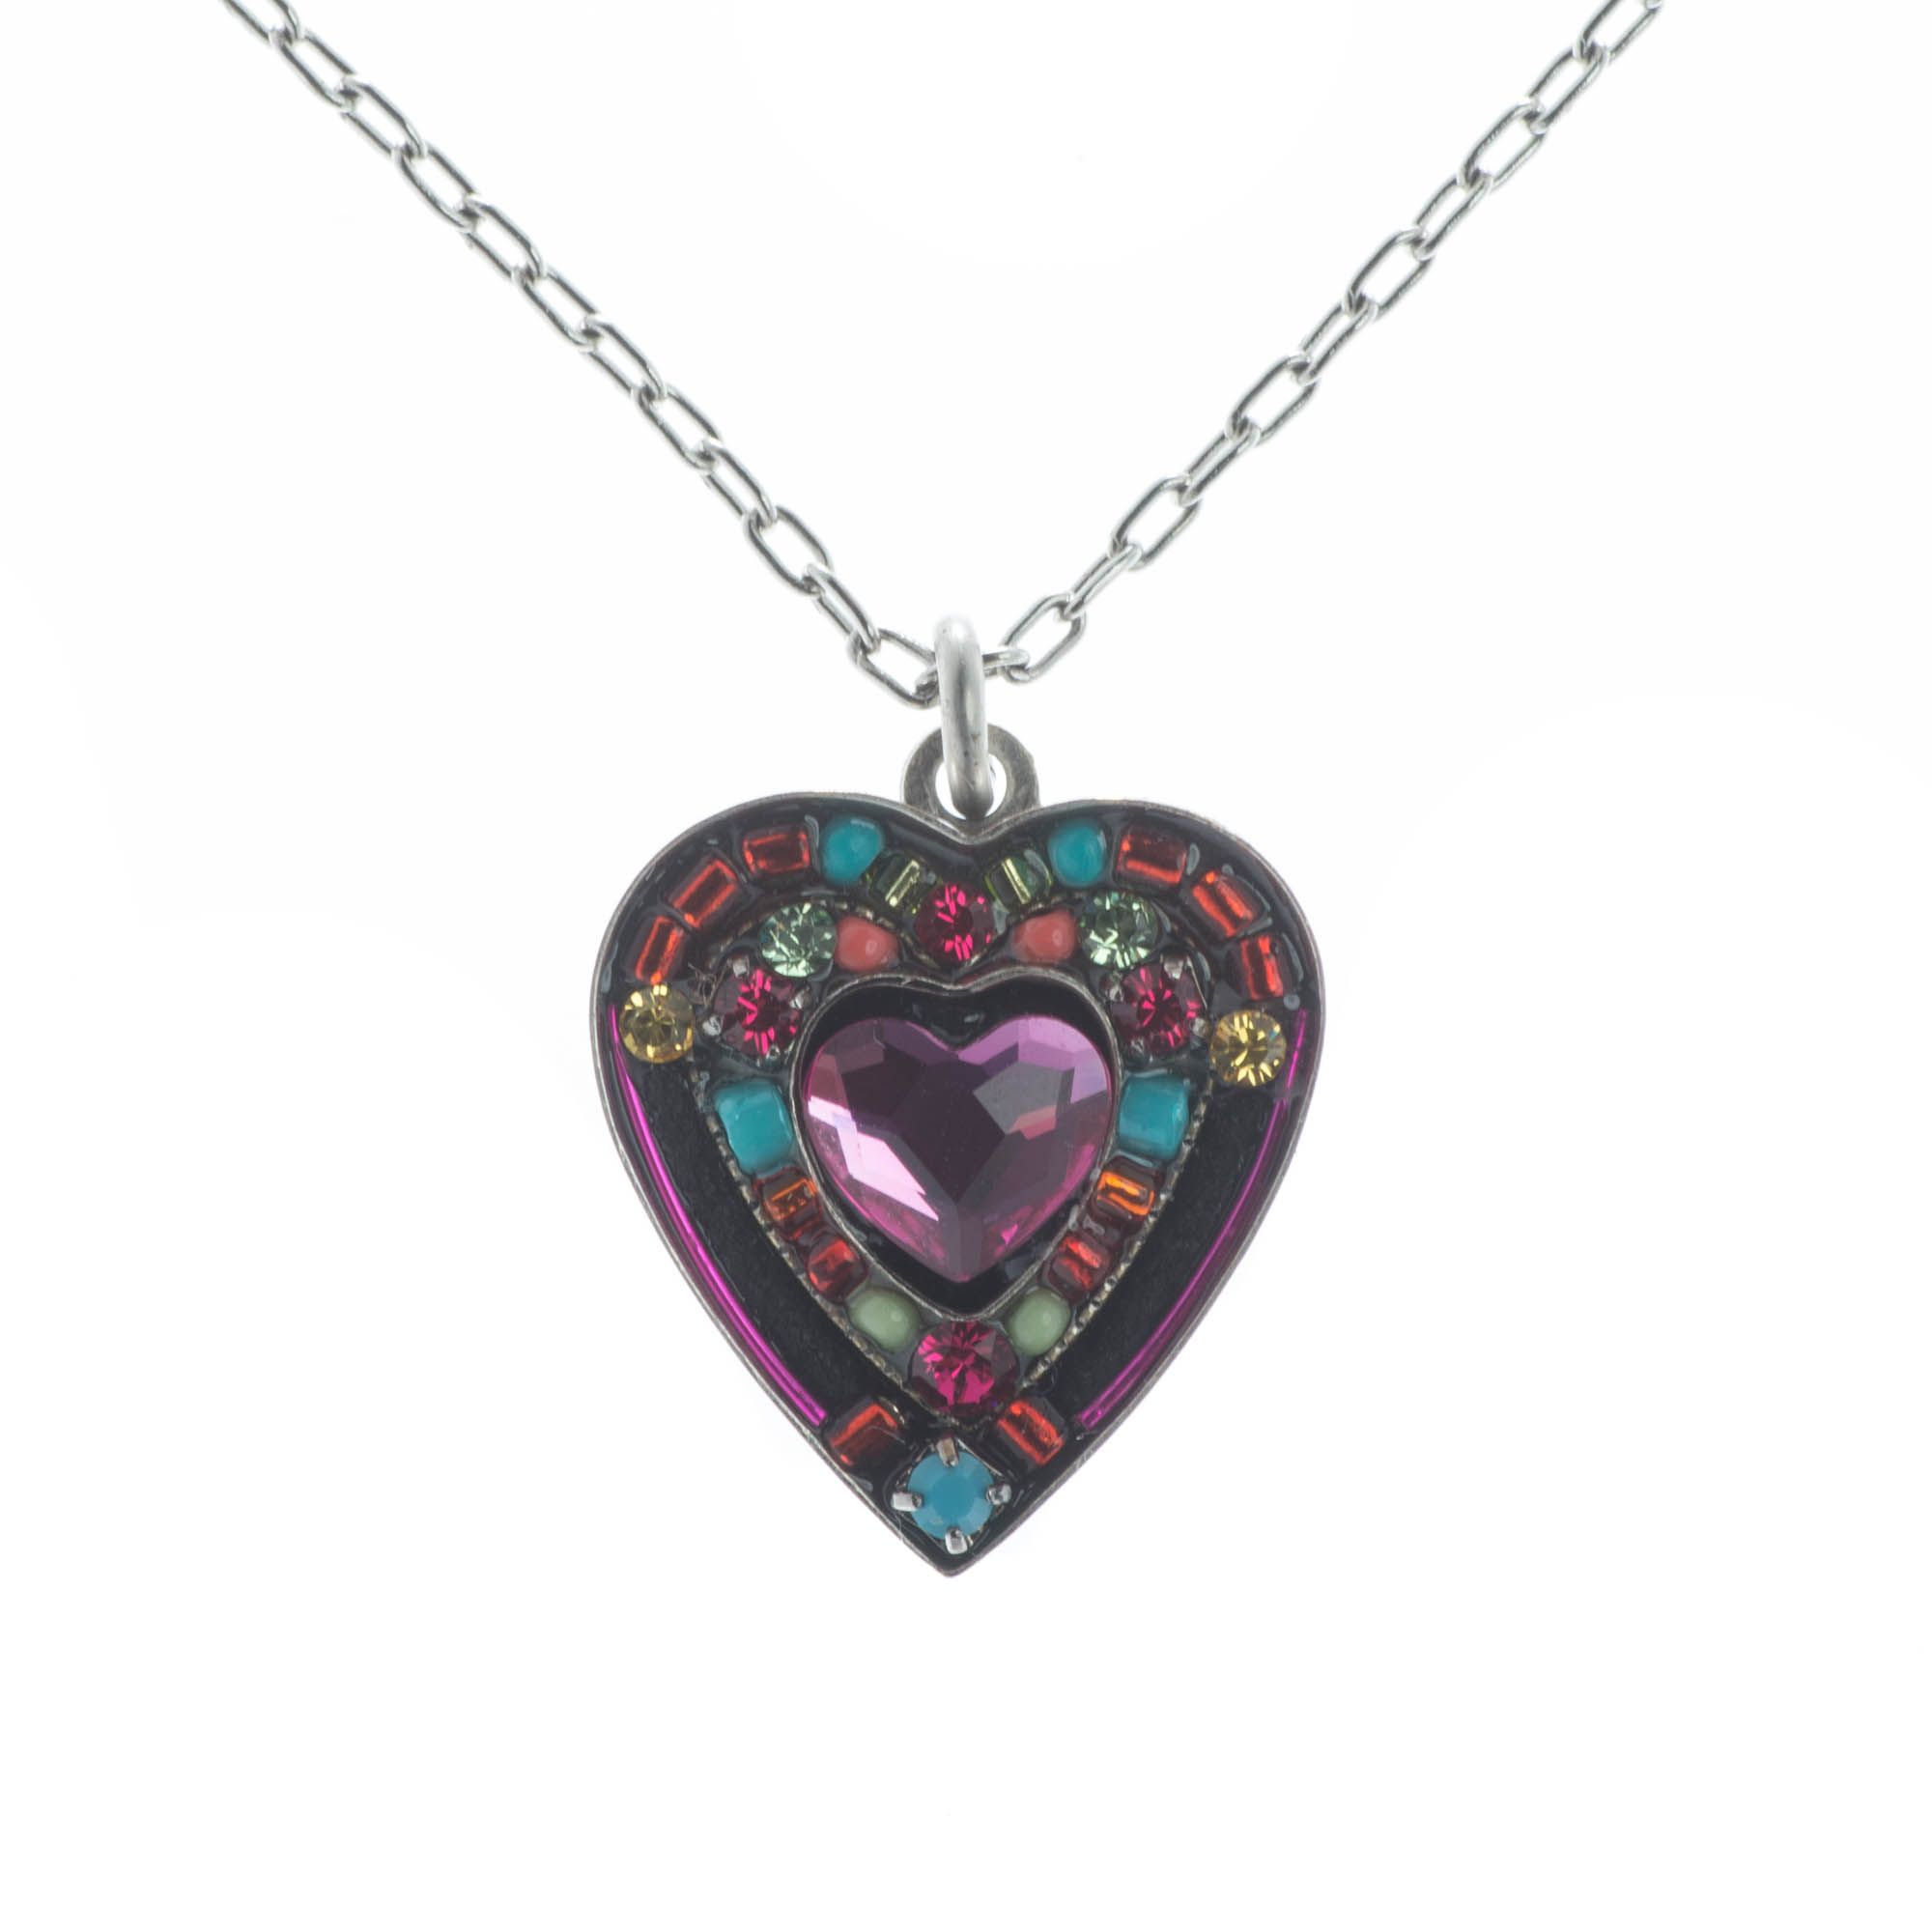 Firefly Mosaic Jewelry Multi-color Rose Heart Crystal Pendant Necklace